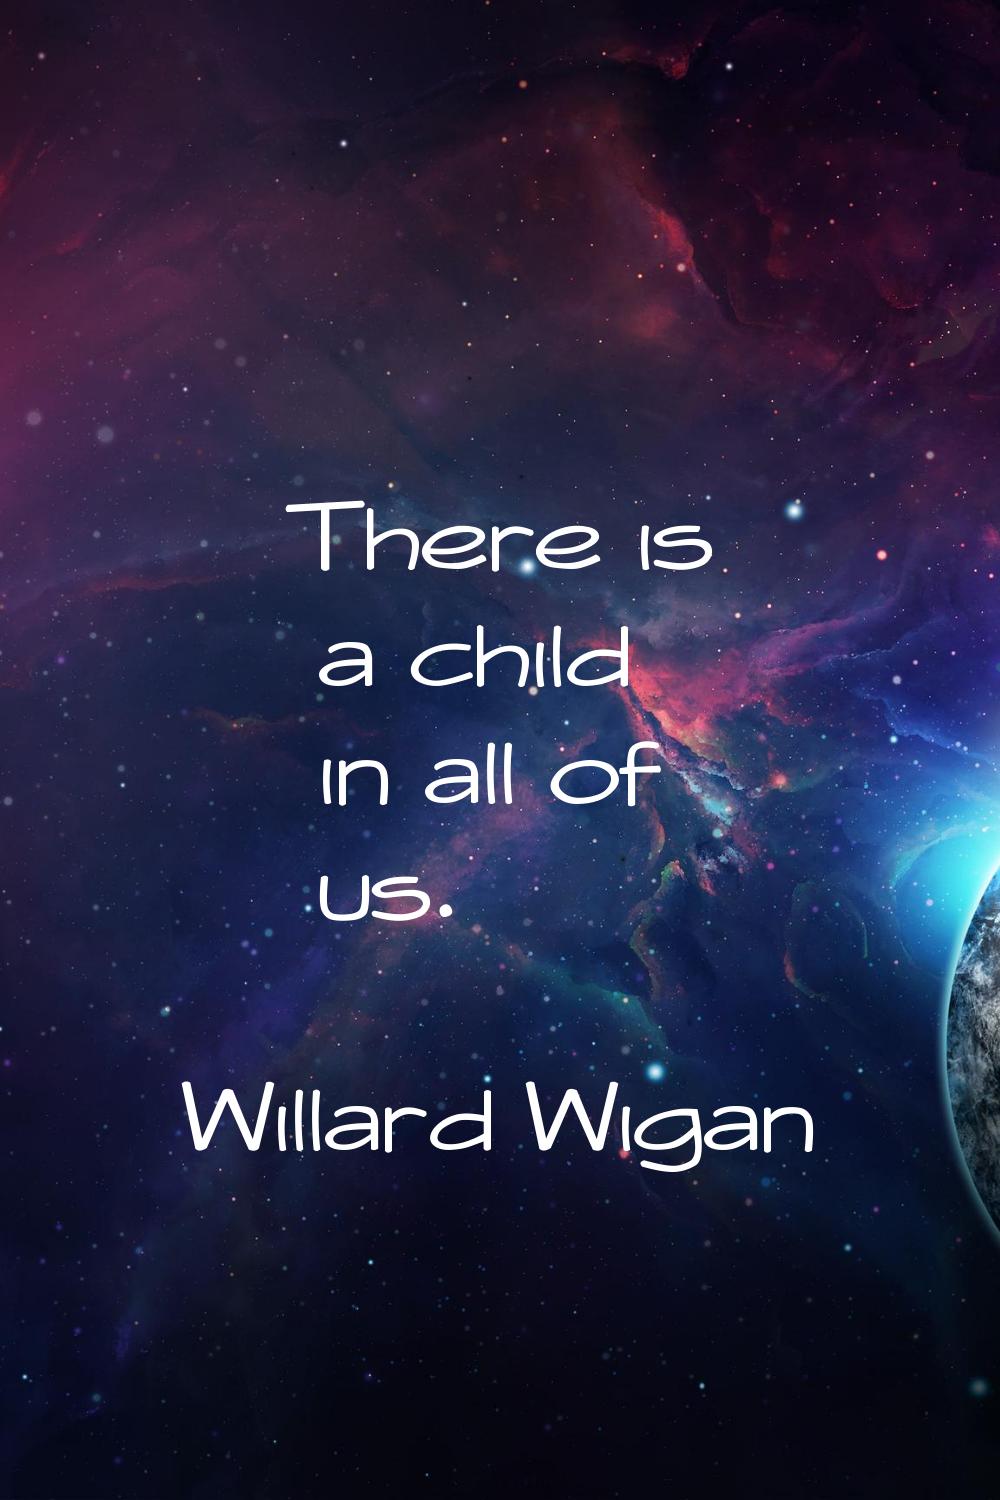 There is a child in all of us.